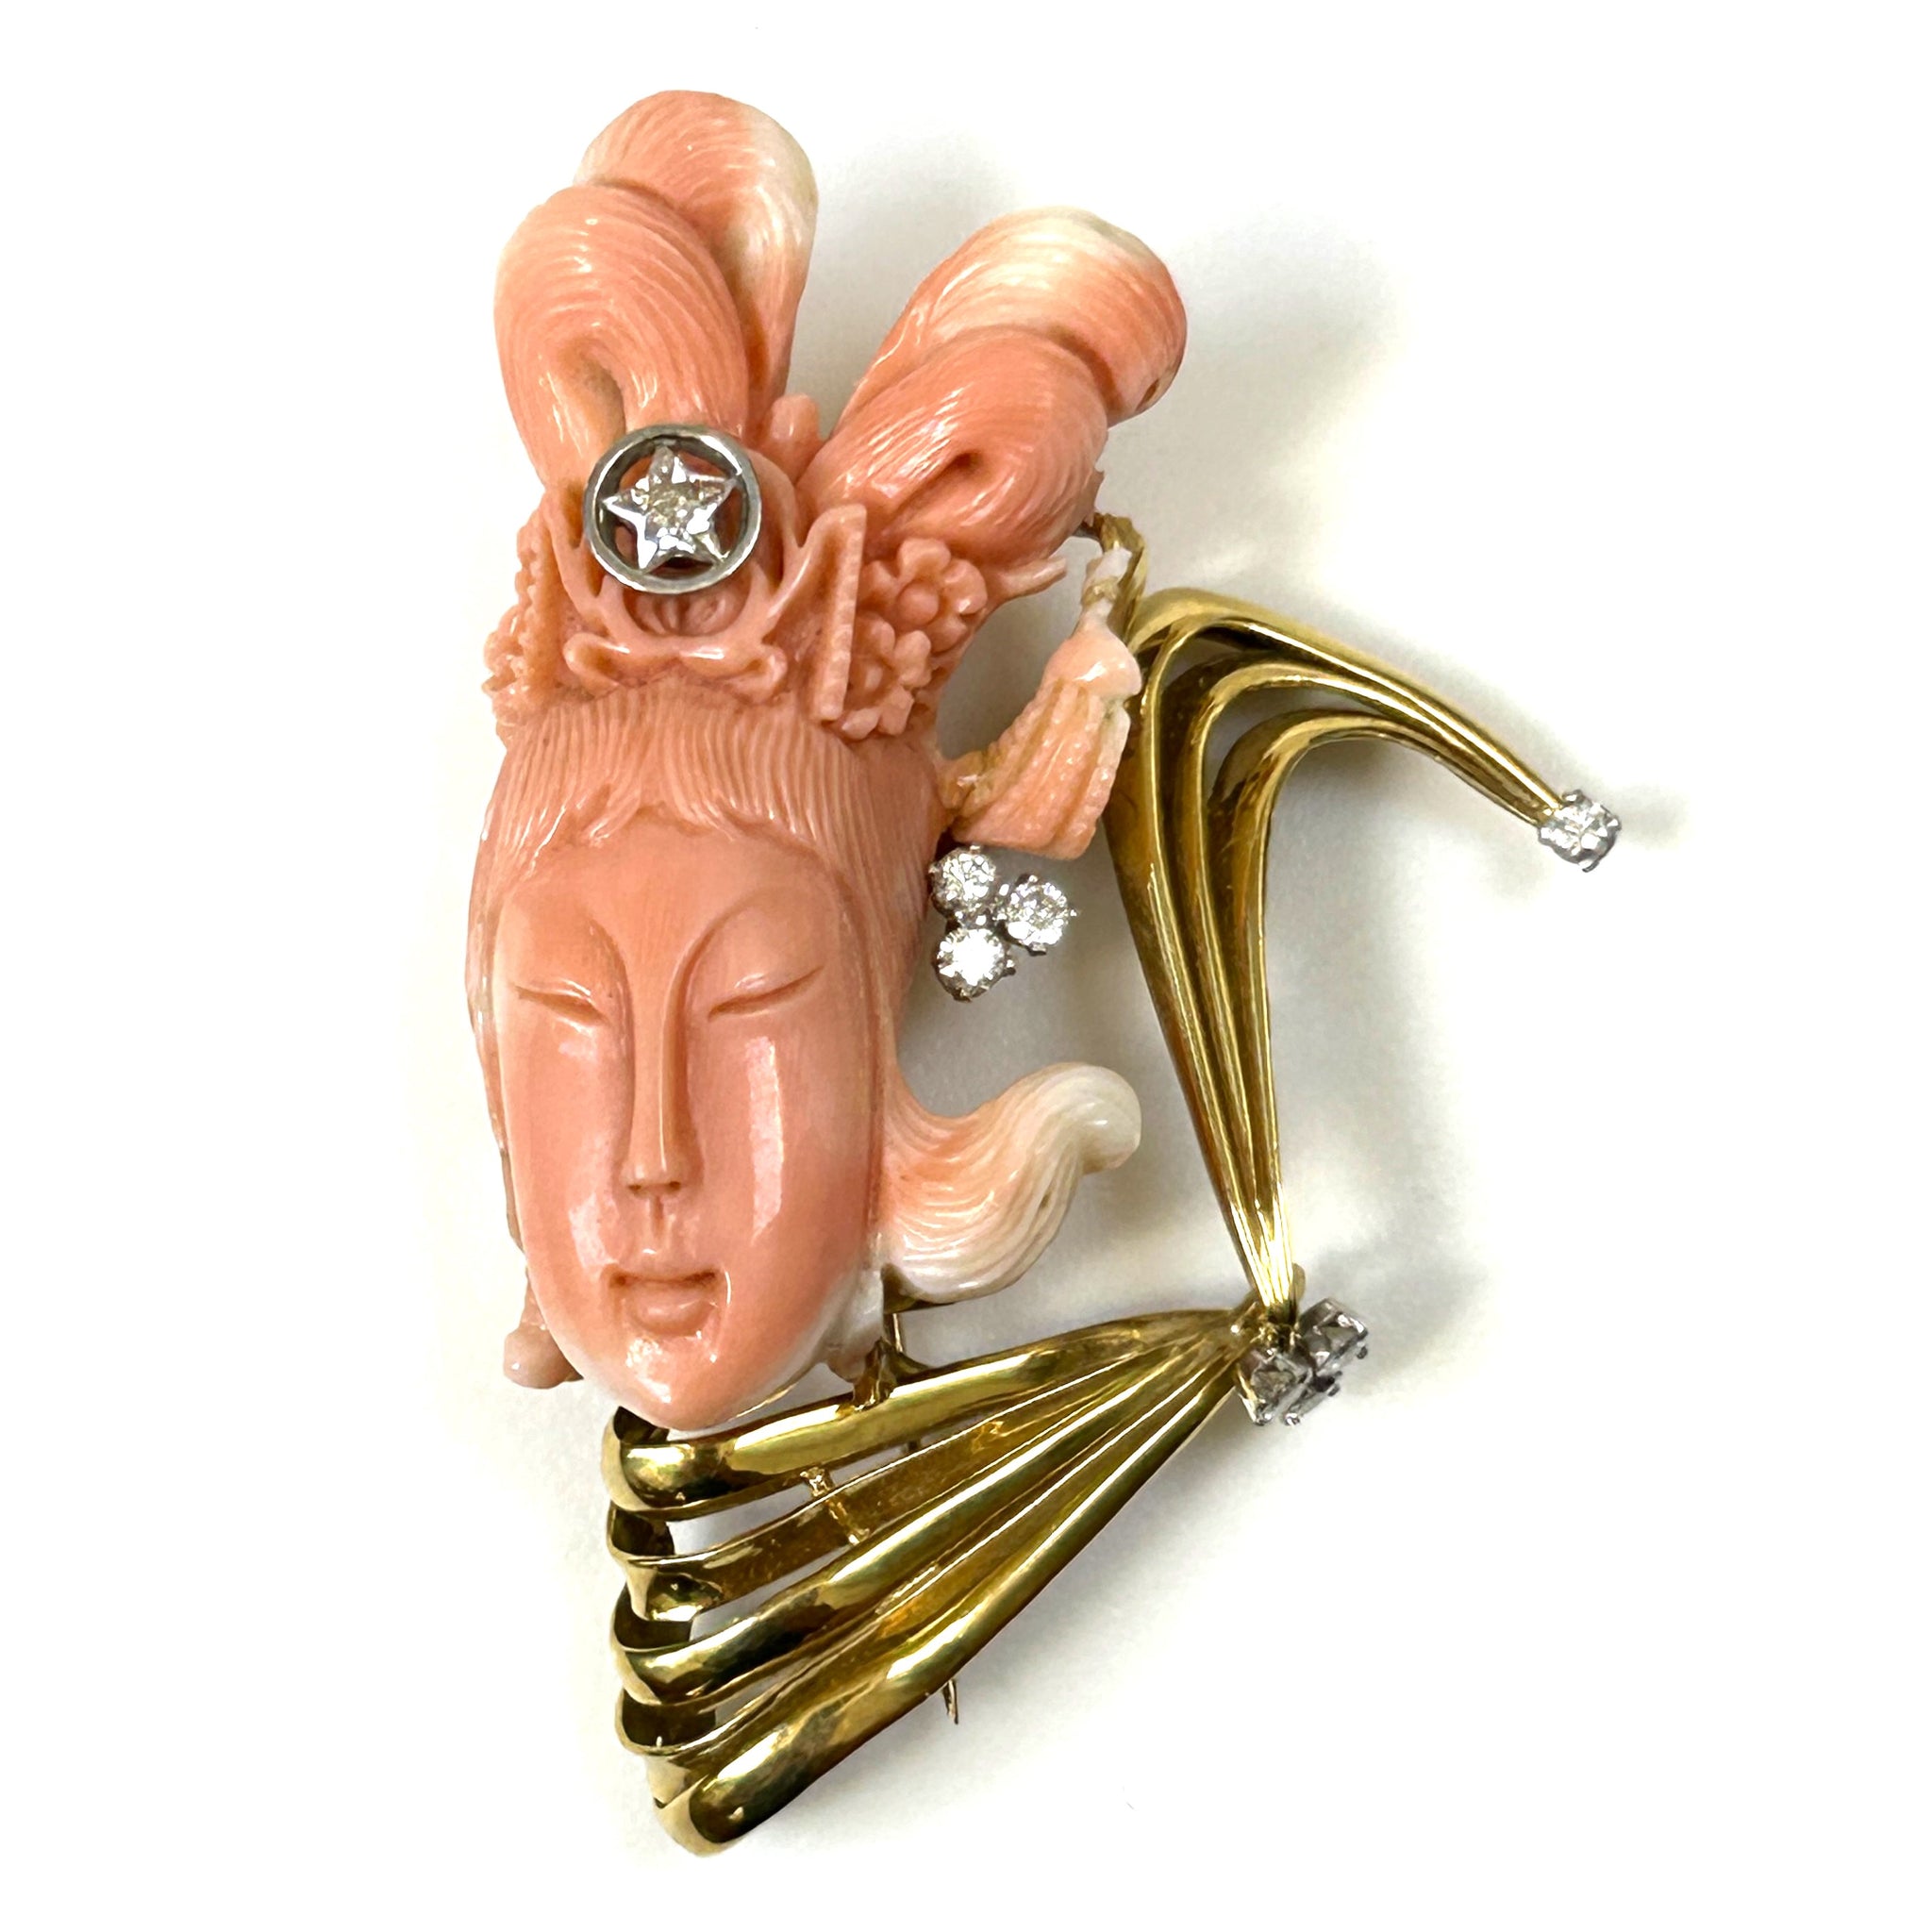 Vintage 18ct Gold, Coral and Diamond “Guan-Yin” Brooch Pendant